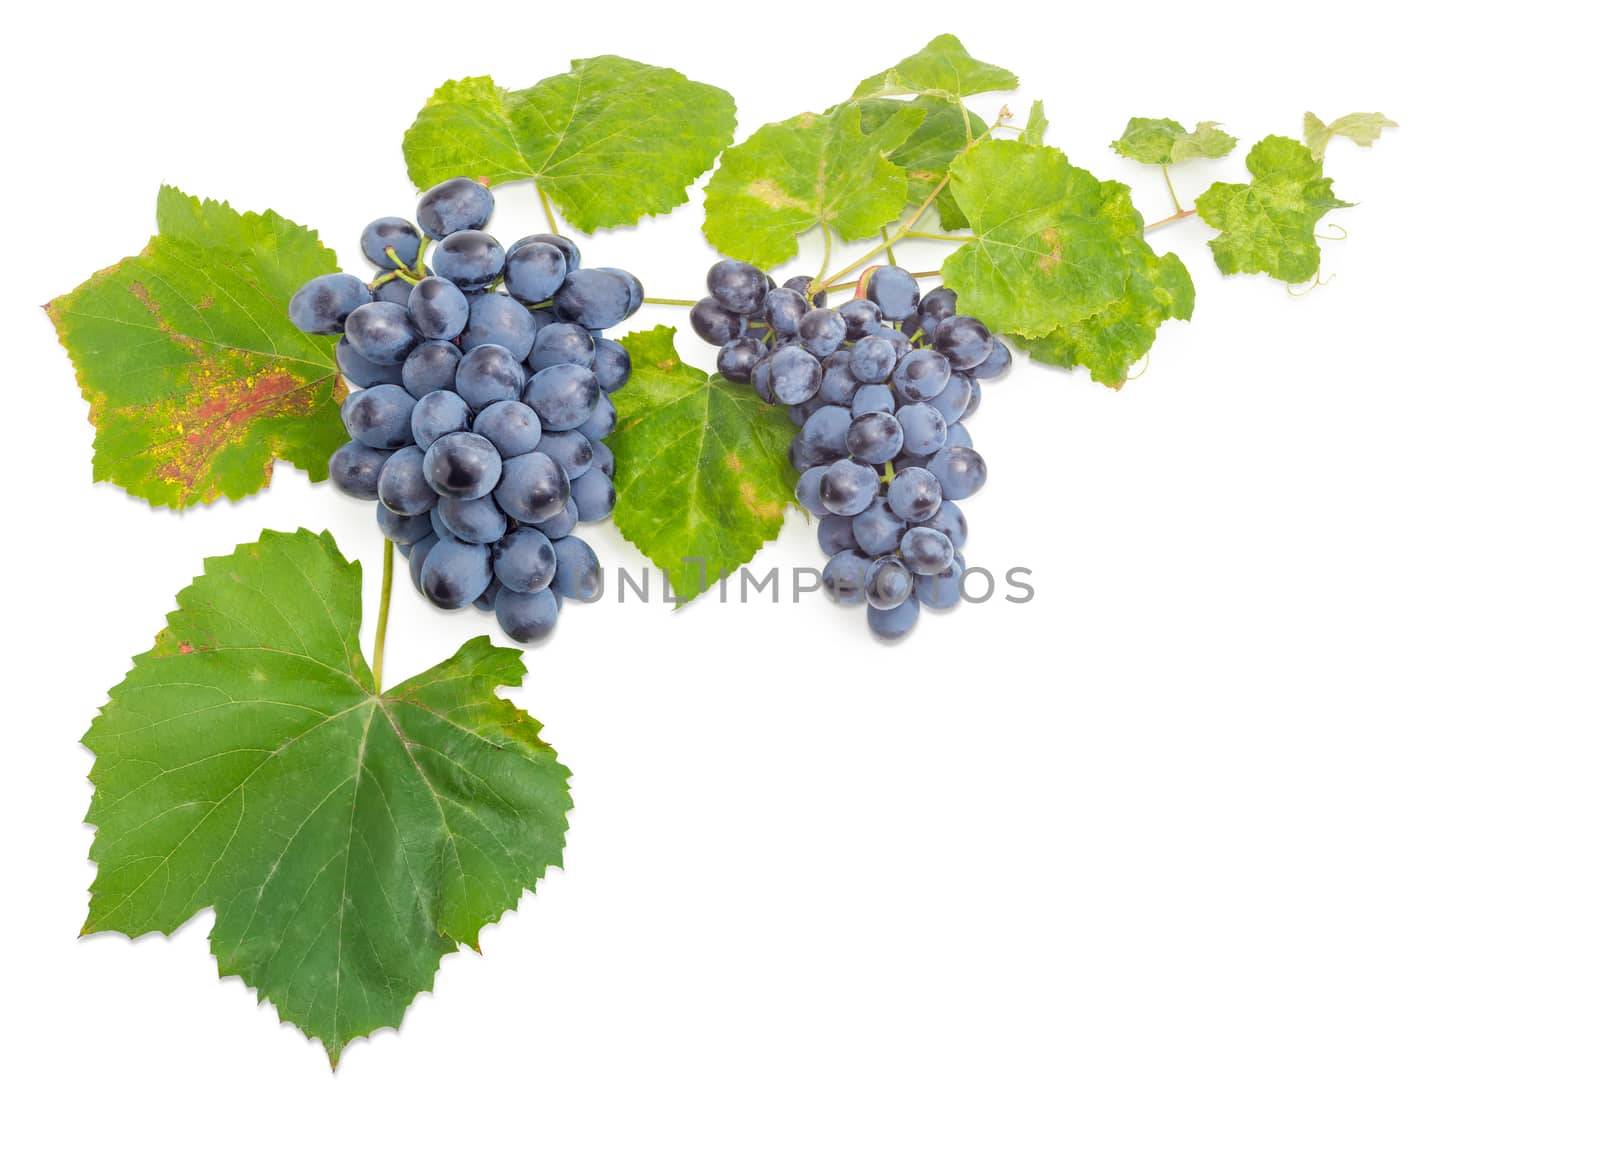 Background of two clusters of the ripe blue table grapes on the vine with autumn leaves and tendrils on a white background
